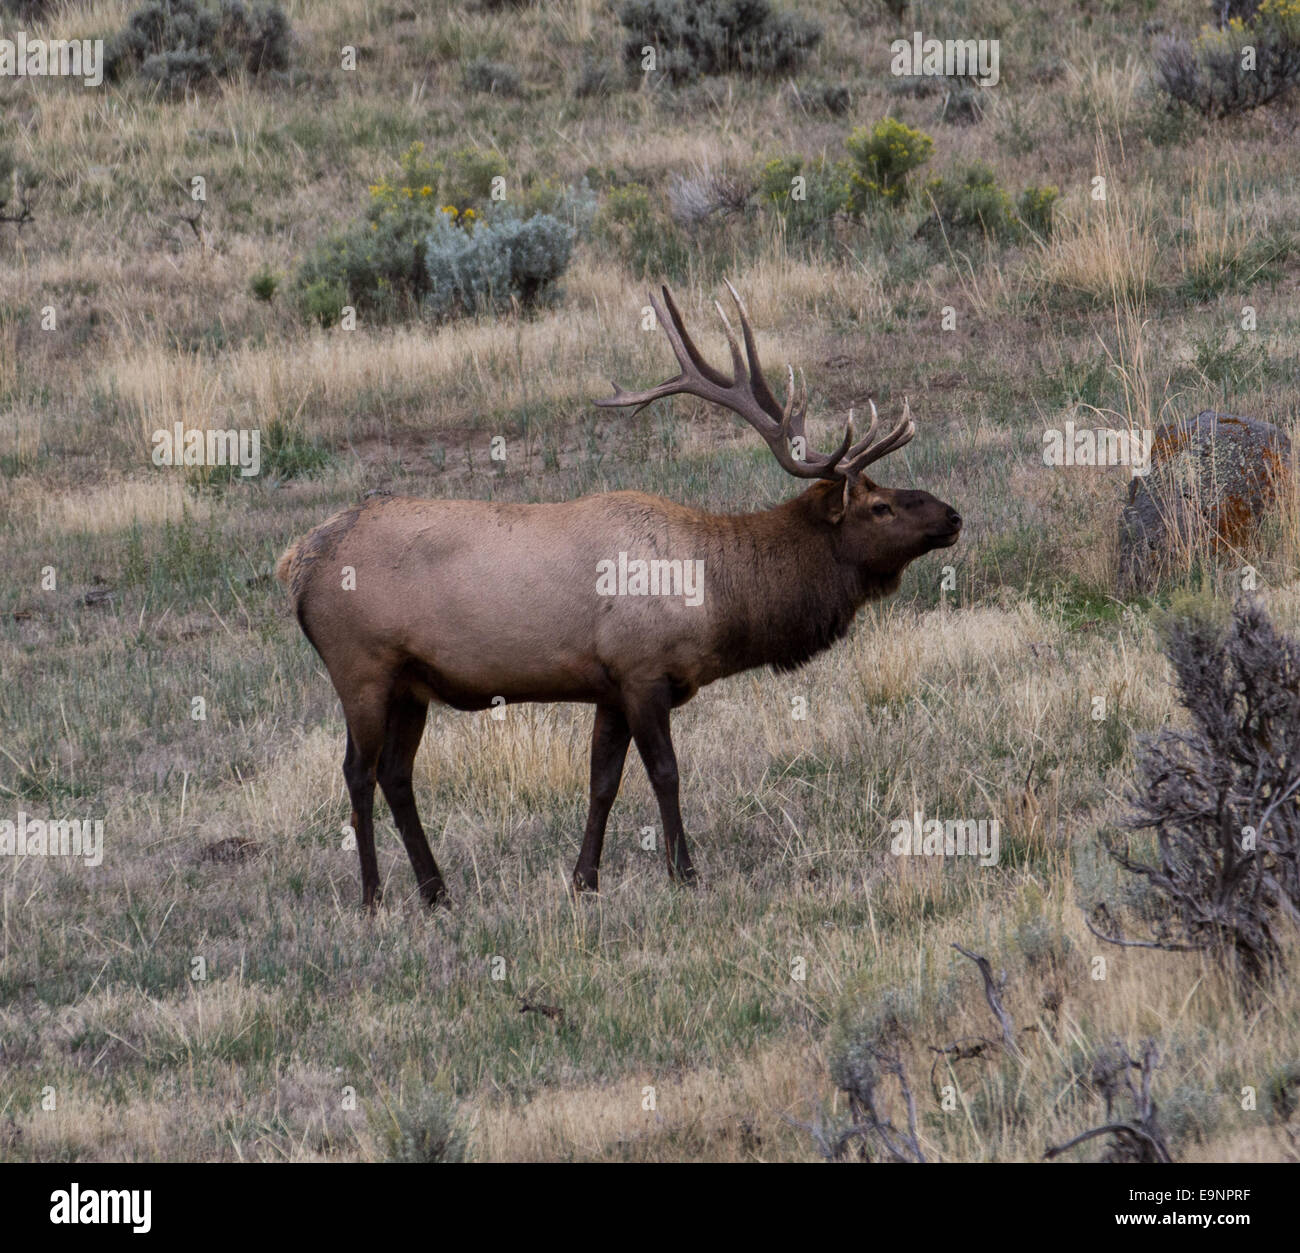 Bull Elk or Wapiti (Cervus canadensis) bellowing in Yellowstone National Park, Wyoming USA Stock Photo